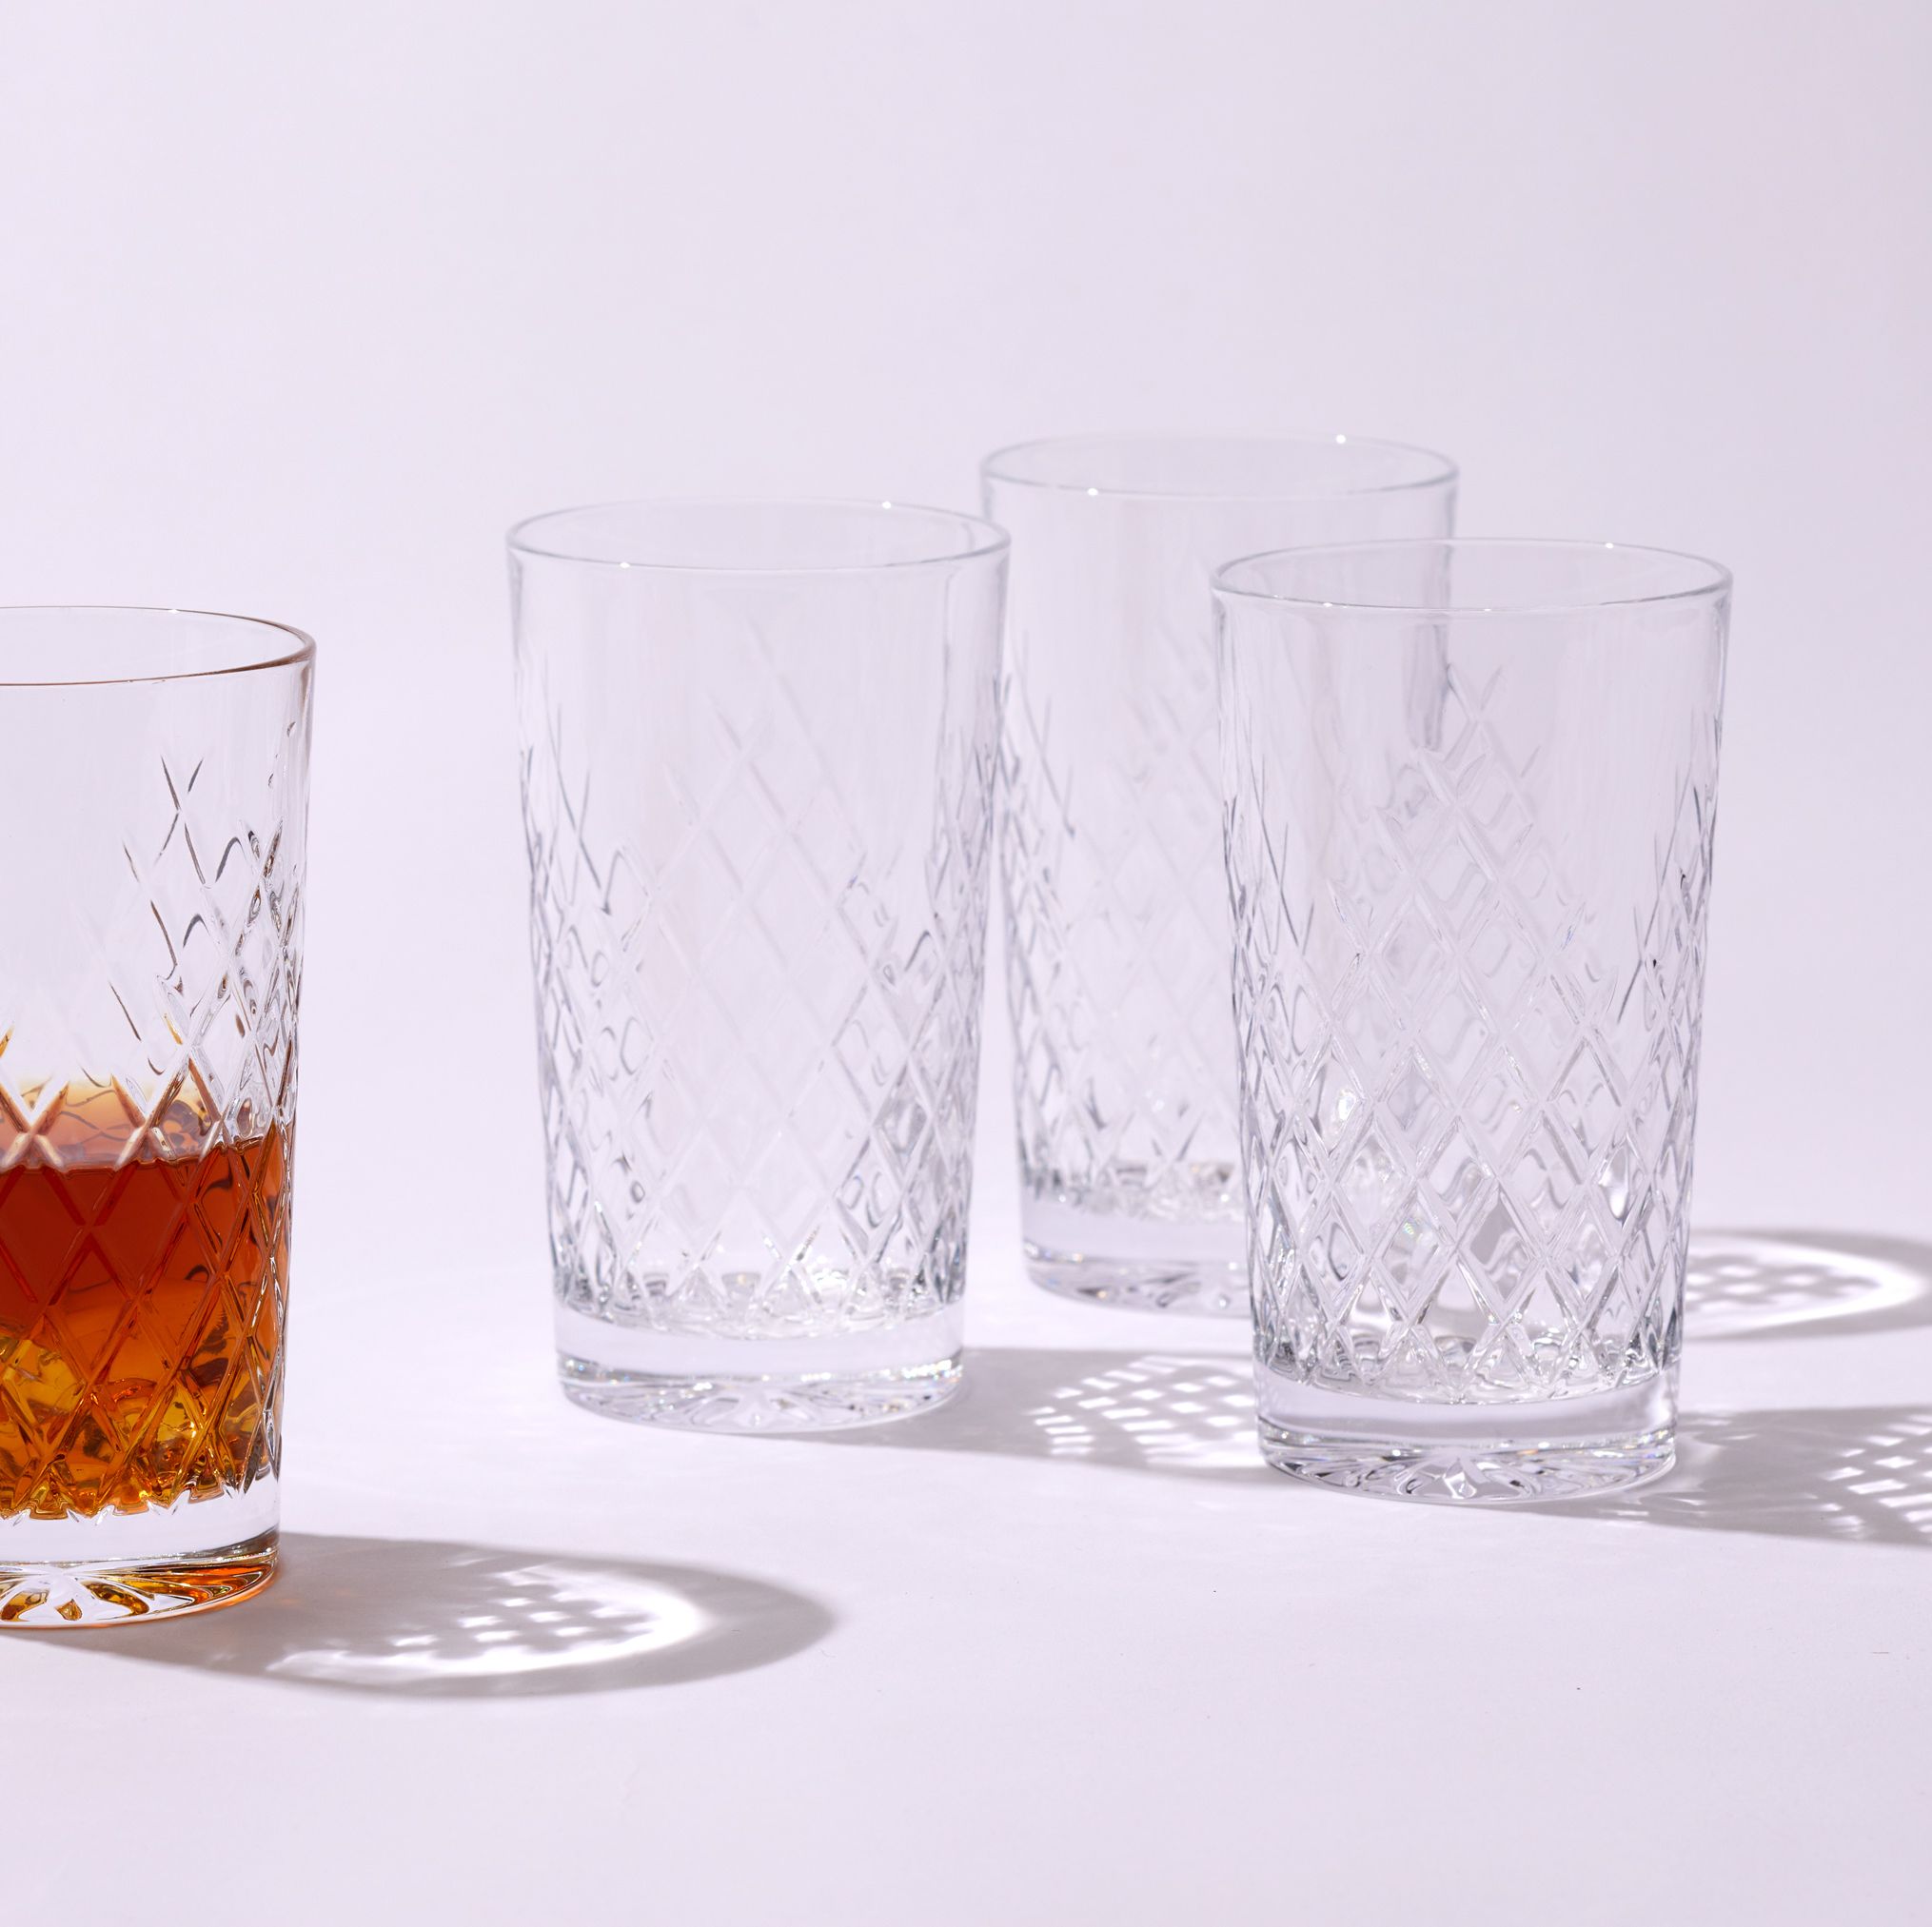 Finally, a Perfect Set of Cocktail Glasses